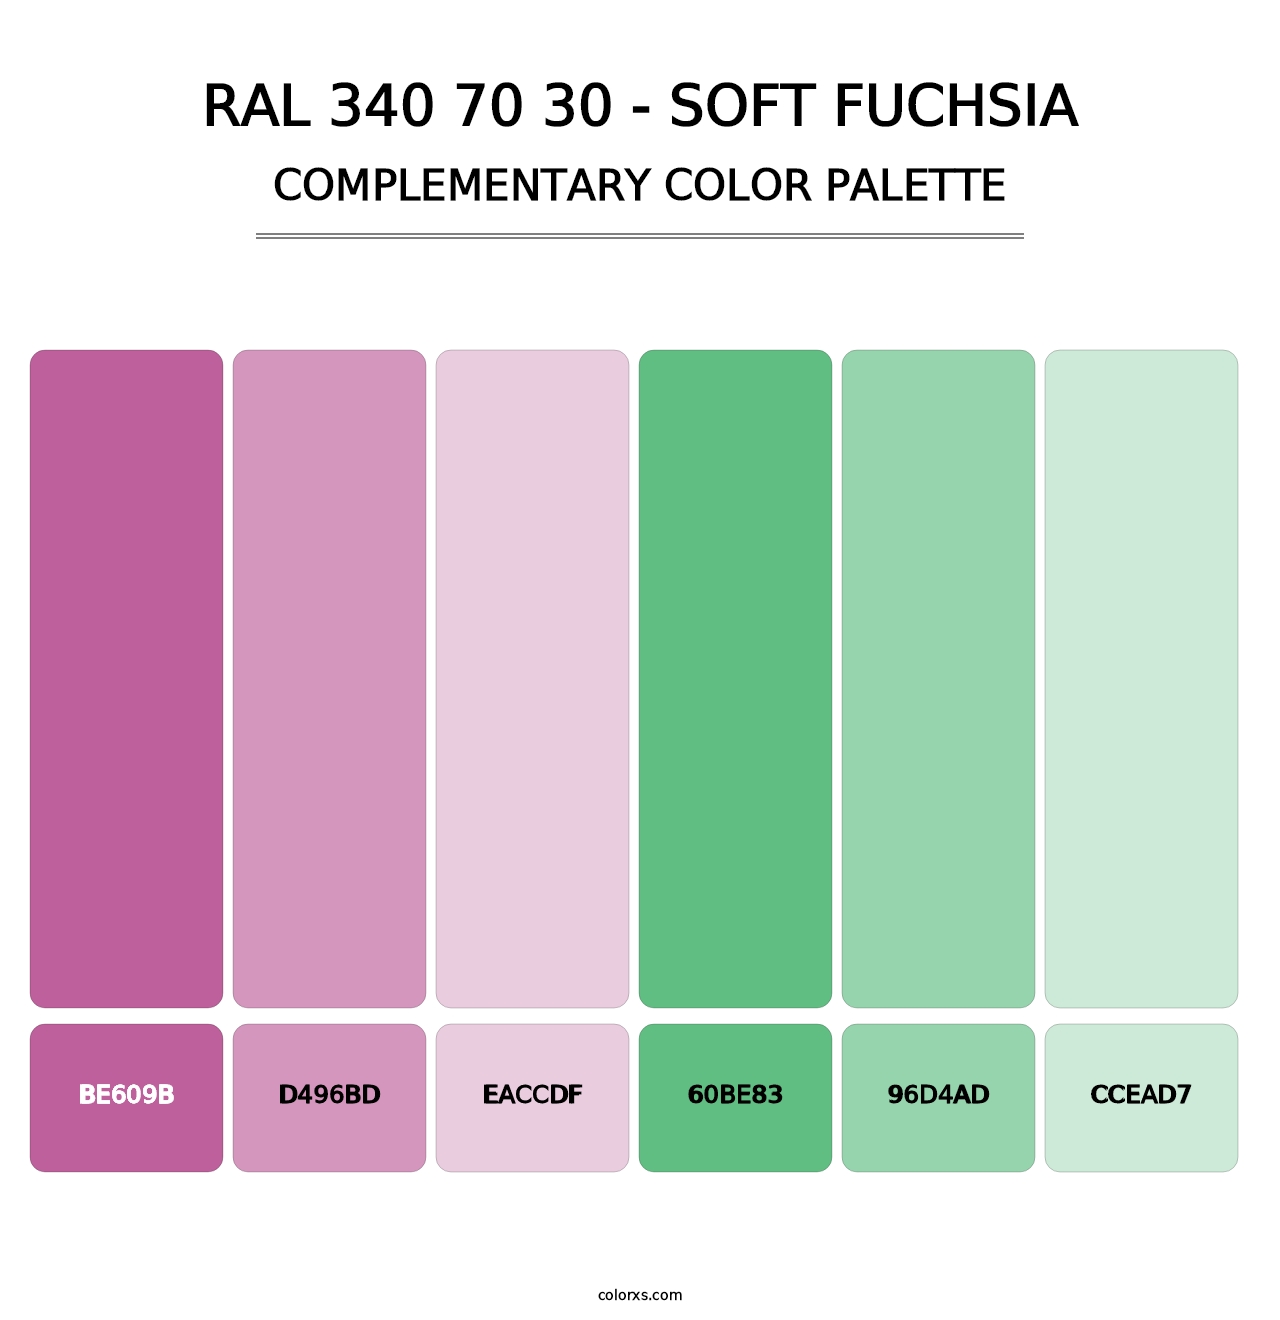 RAL 340 70 30 - Soft Fuchsia - Complementary Color Palette